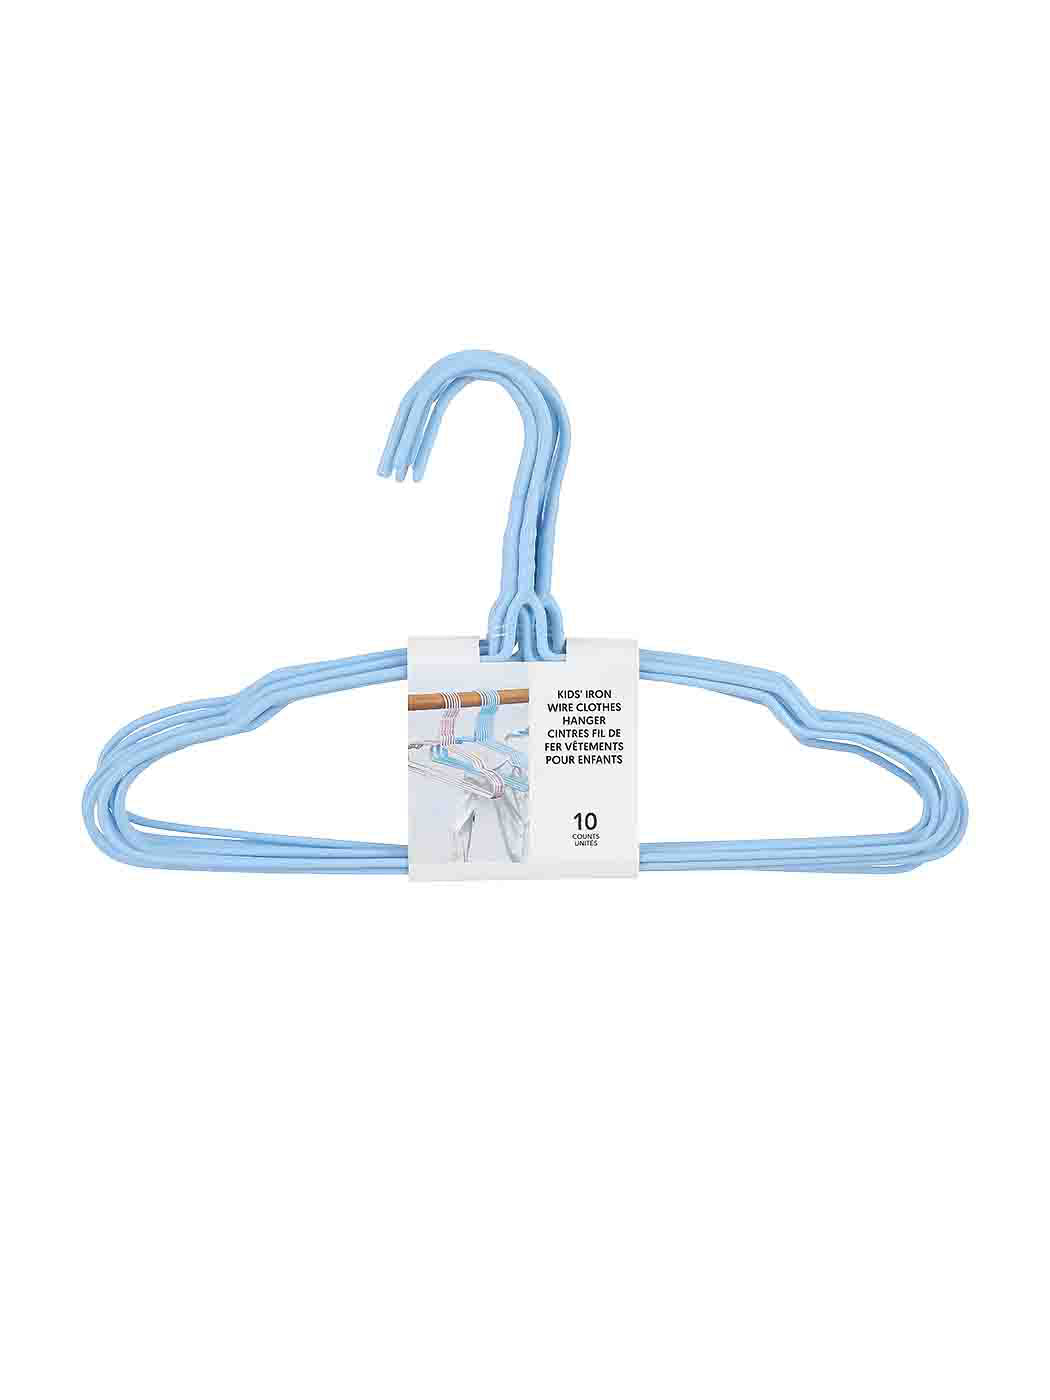 MINISO KIDS' CLOTHES HANGER WITH HOOK 10PCS(BLUE) 2010309510108 CLOTHES HANGERS